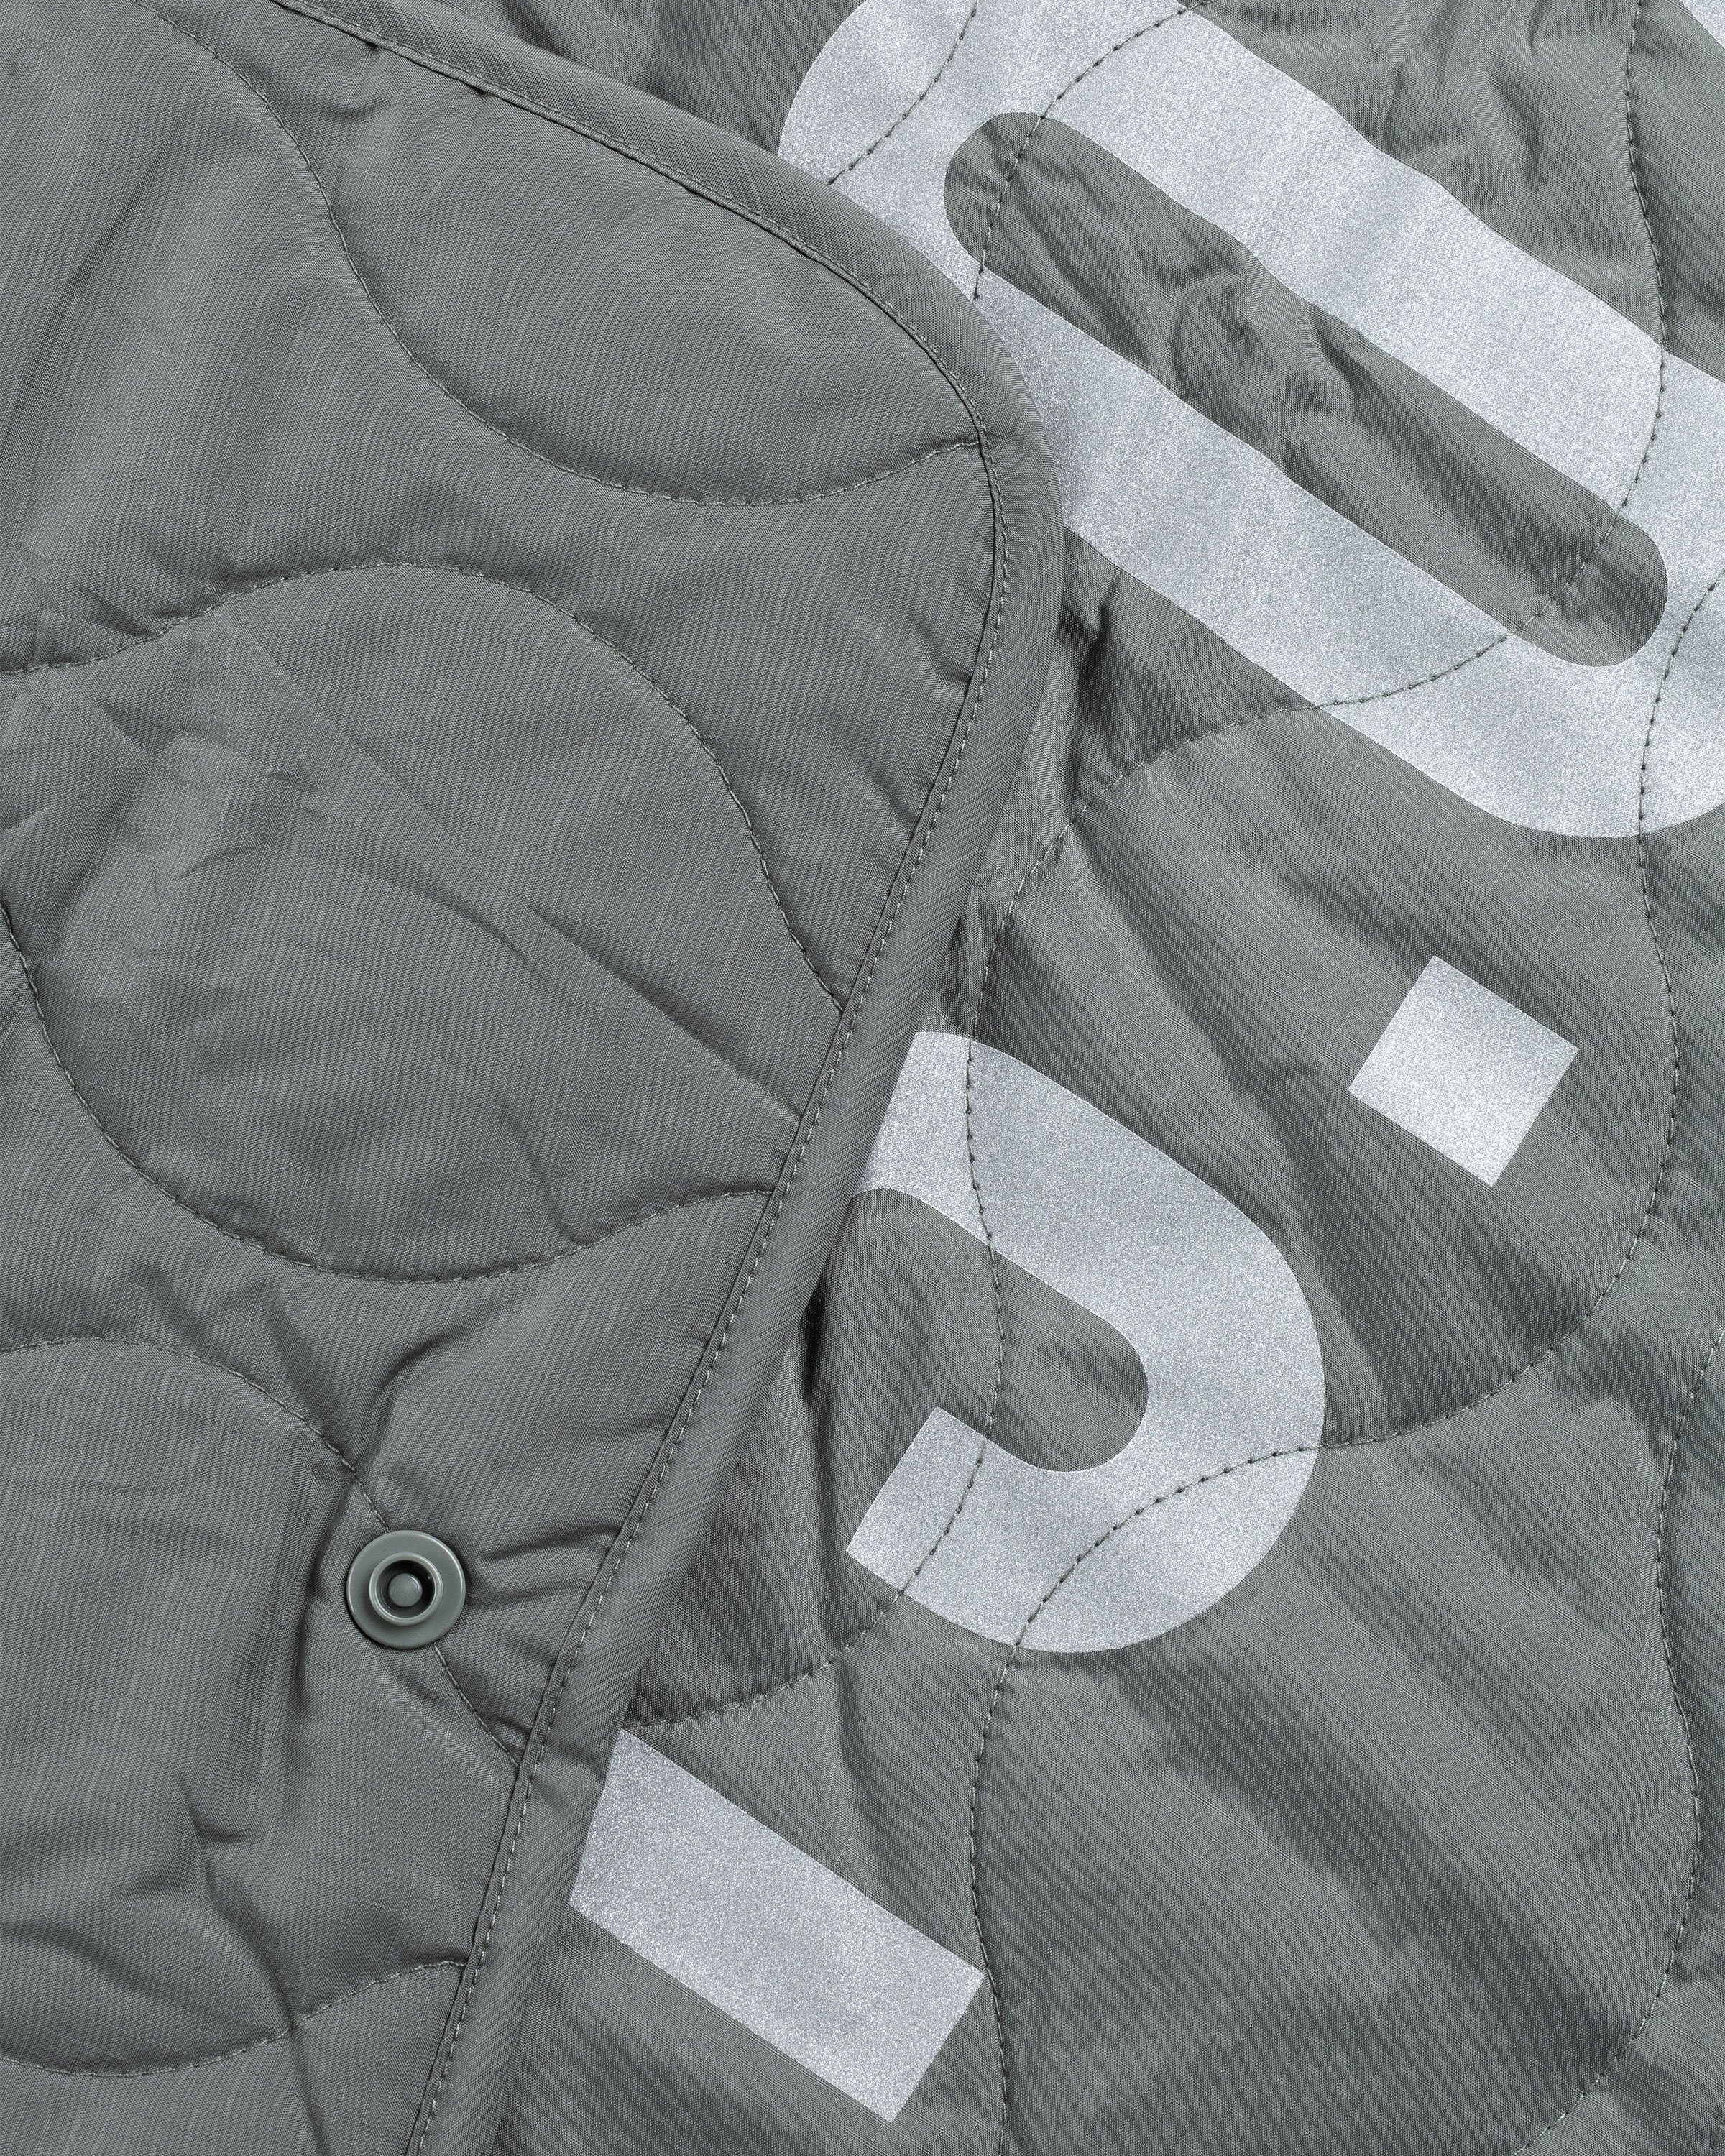 Carhartt WIP - Tour Quilted Blanket Green - Lifestyle - Green - Image 4